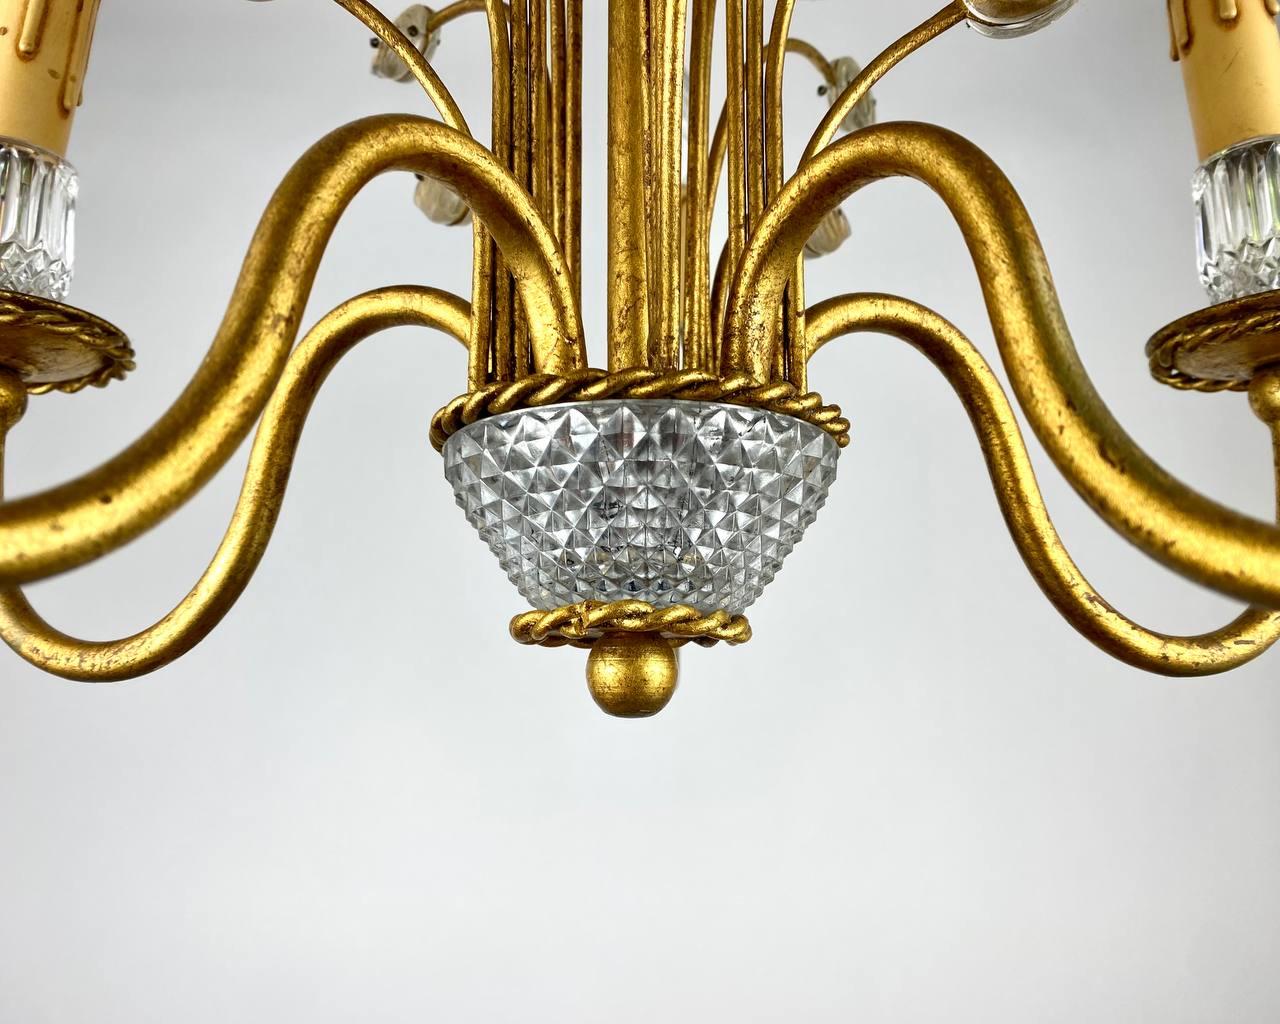 Late 20th Century Italian Chandelier by Banci Firenze  Vintage Gilded Chandelier, 1970s For Sale